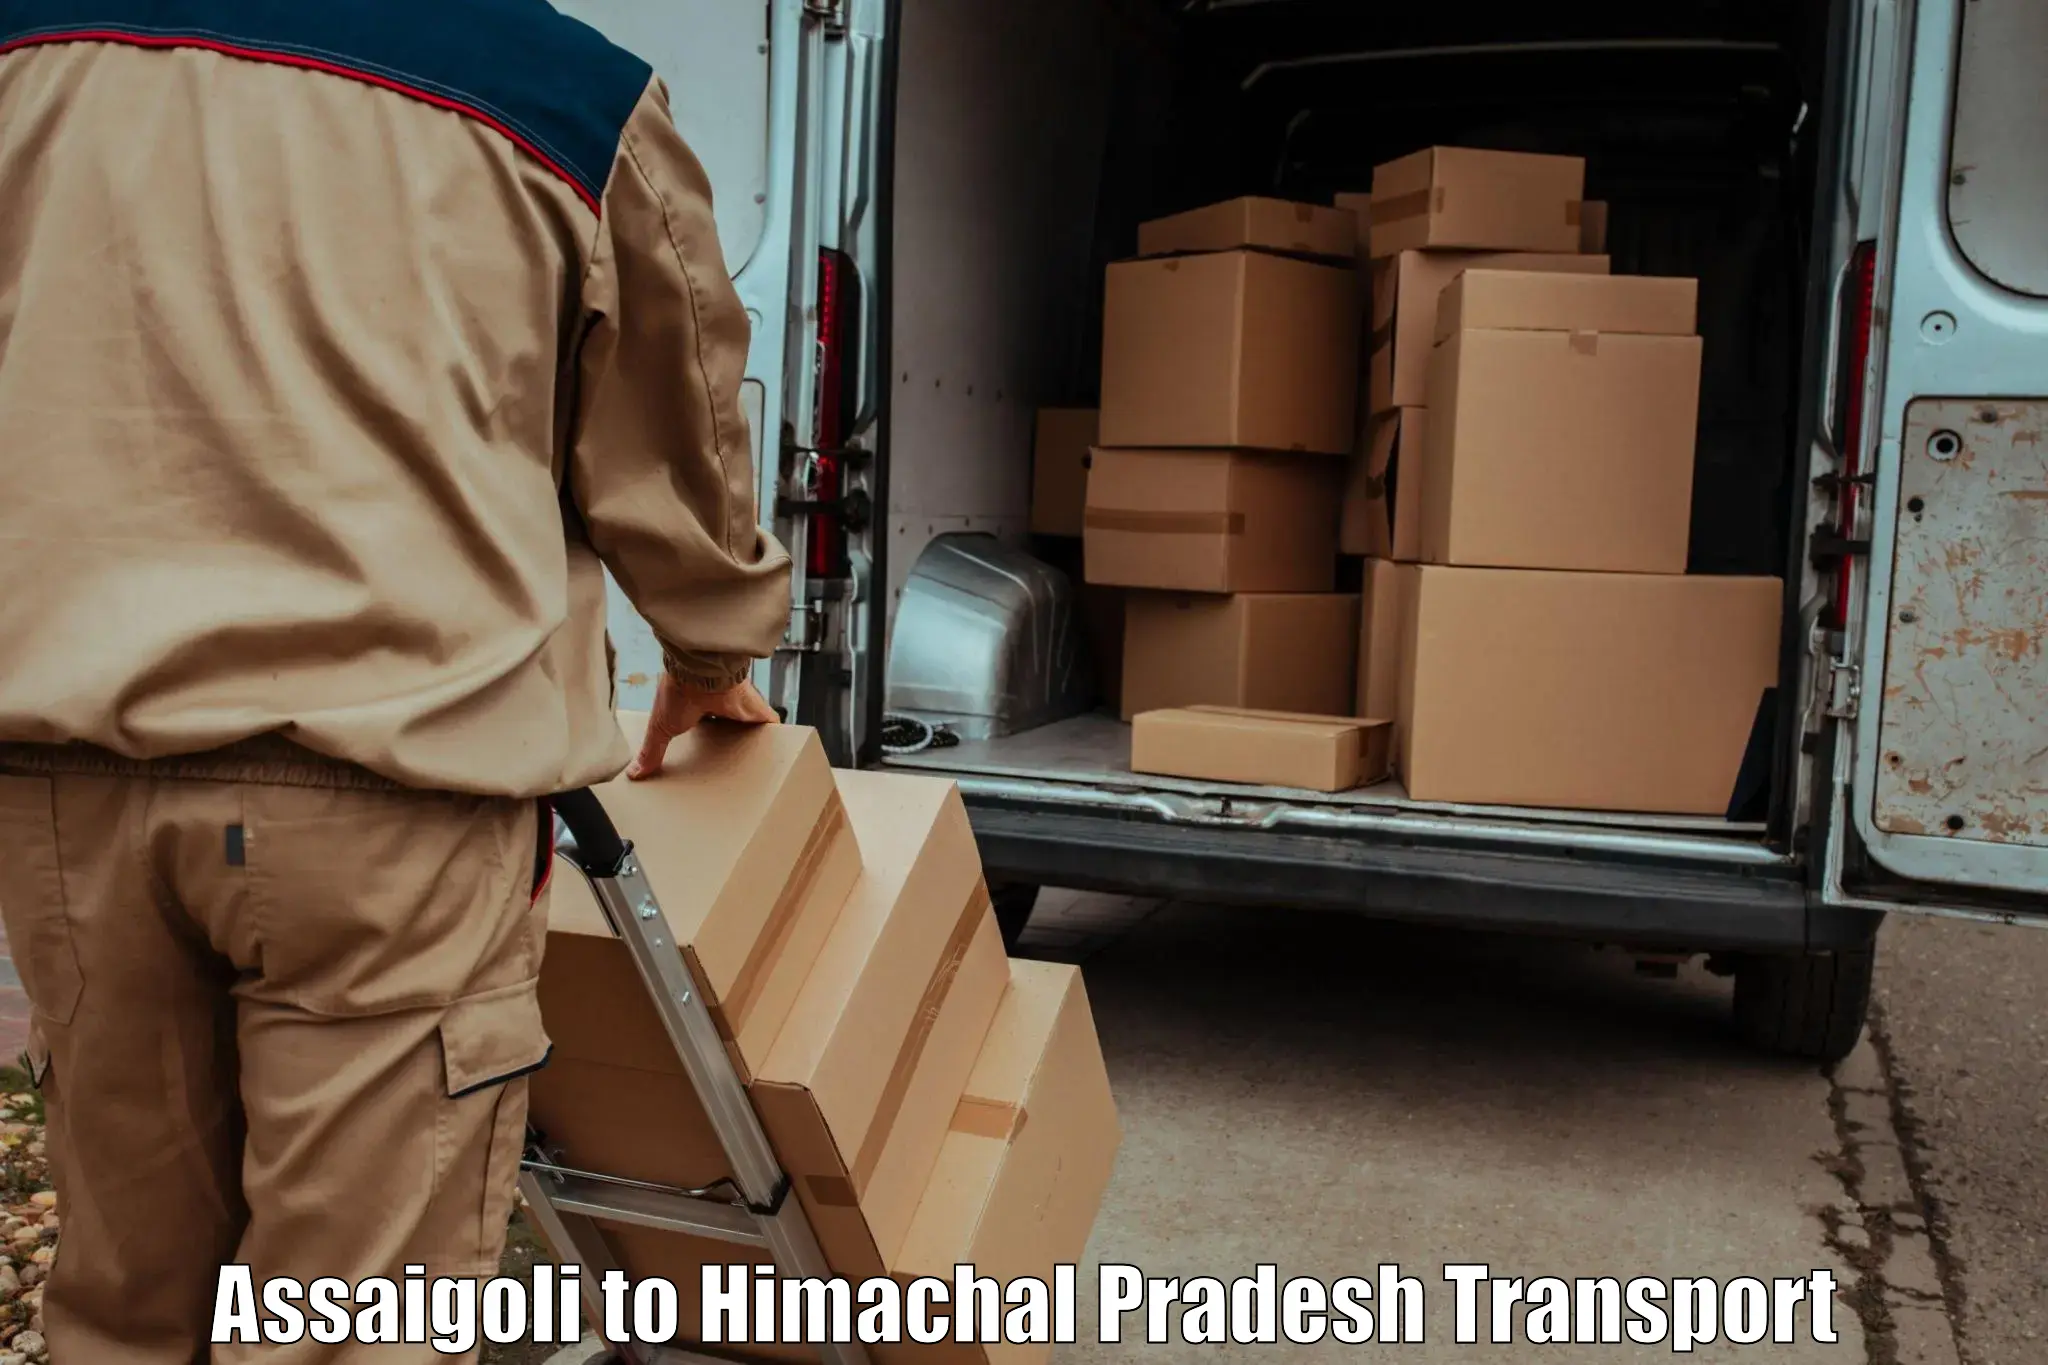 Part load transport service in India Assaigoli to Chachyot